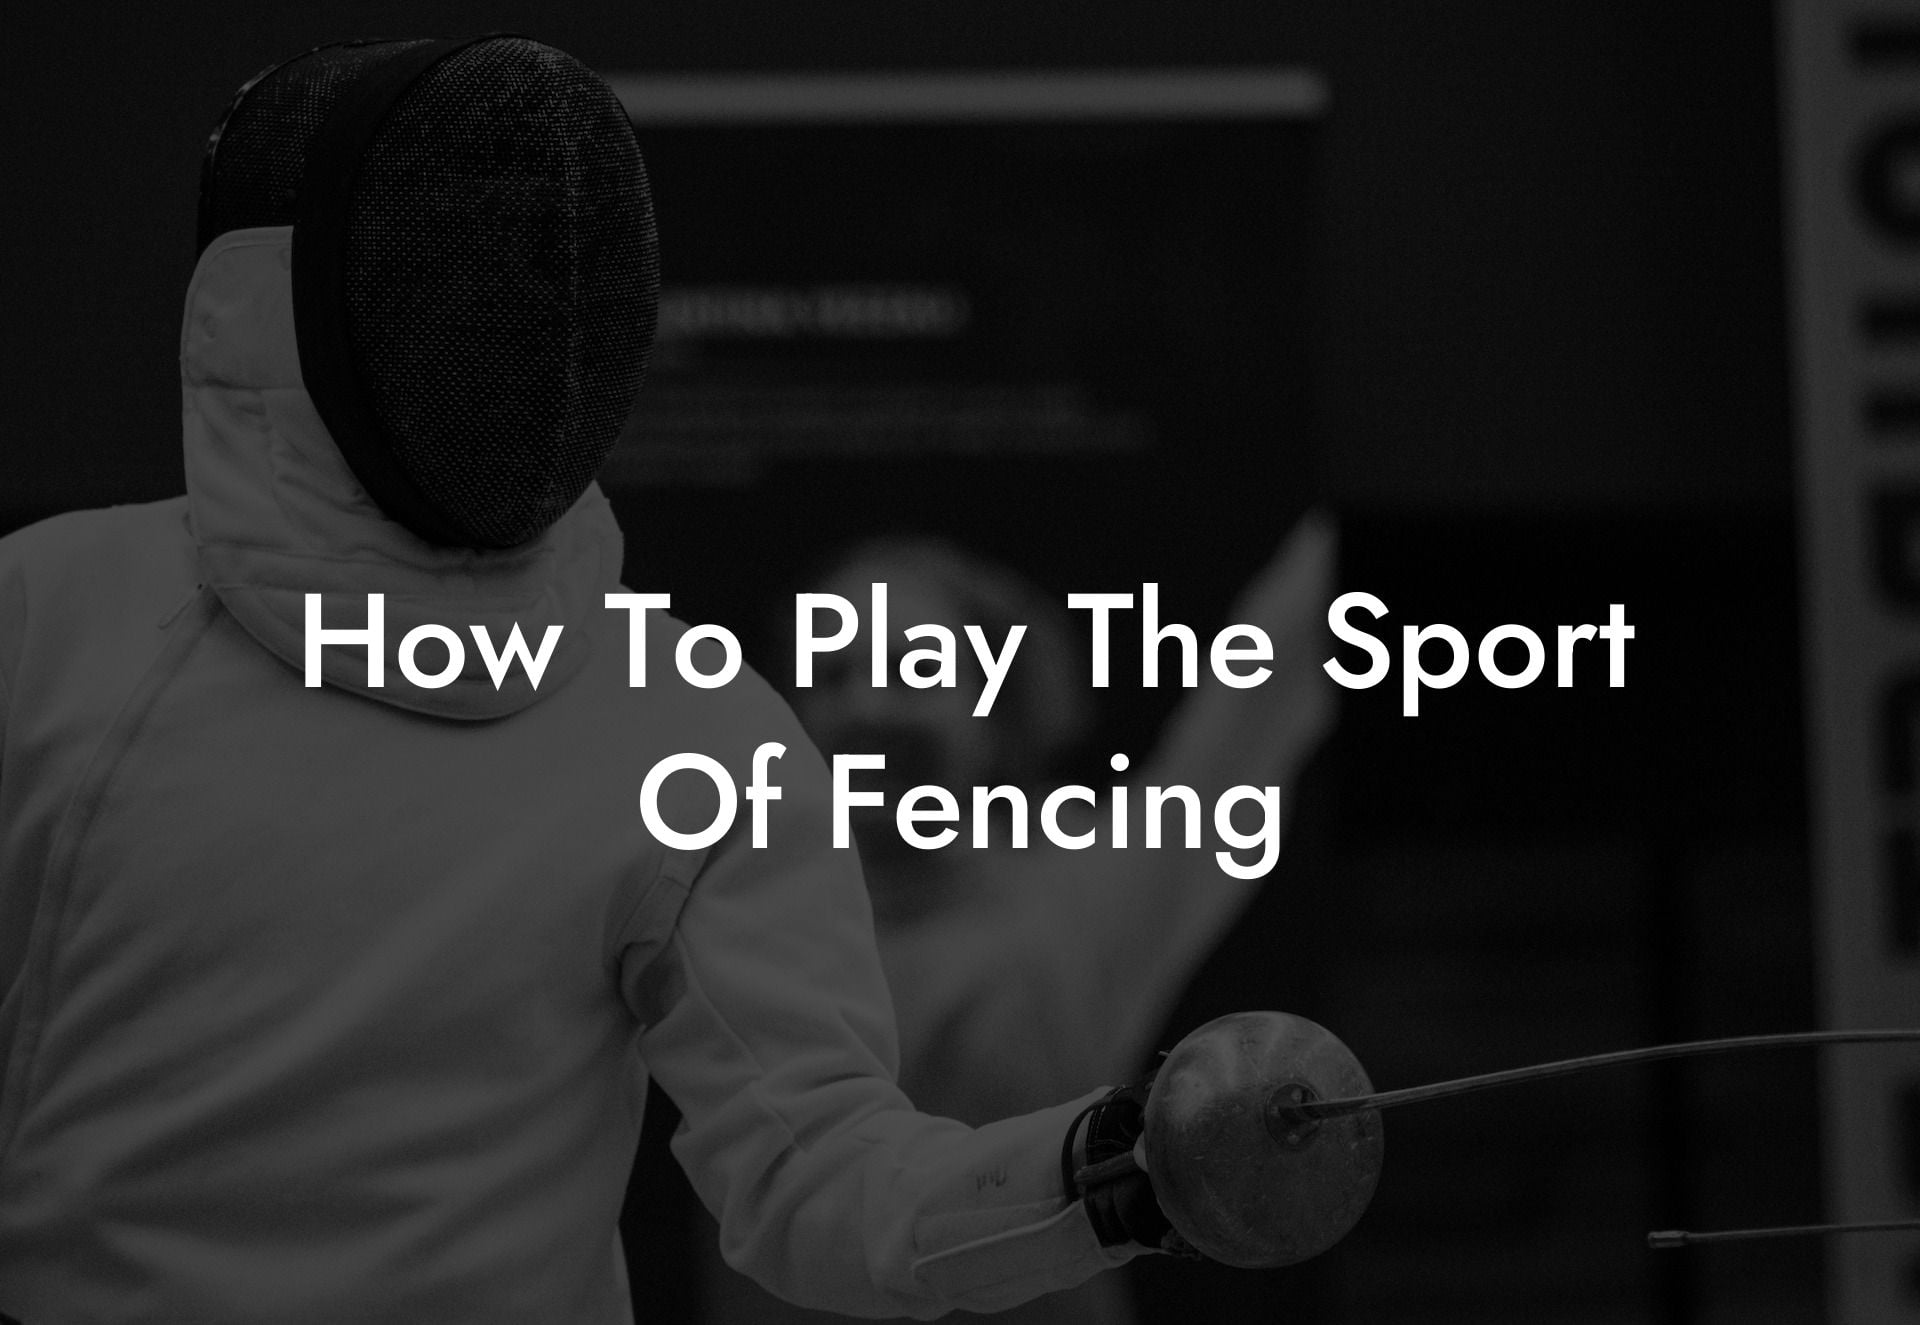 How To Play The Sport Of Fencing